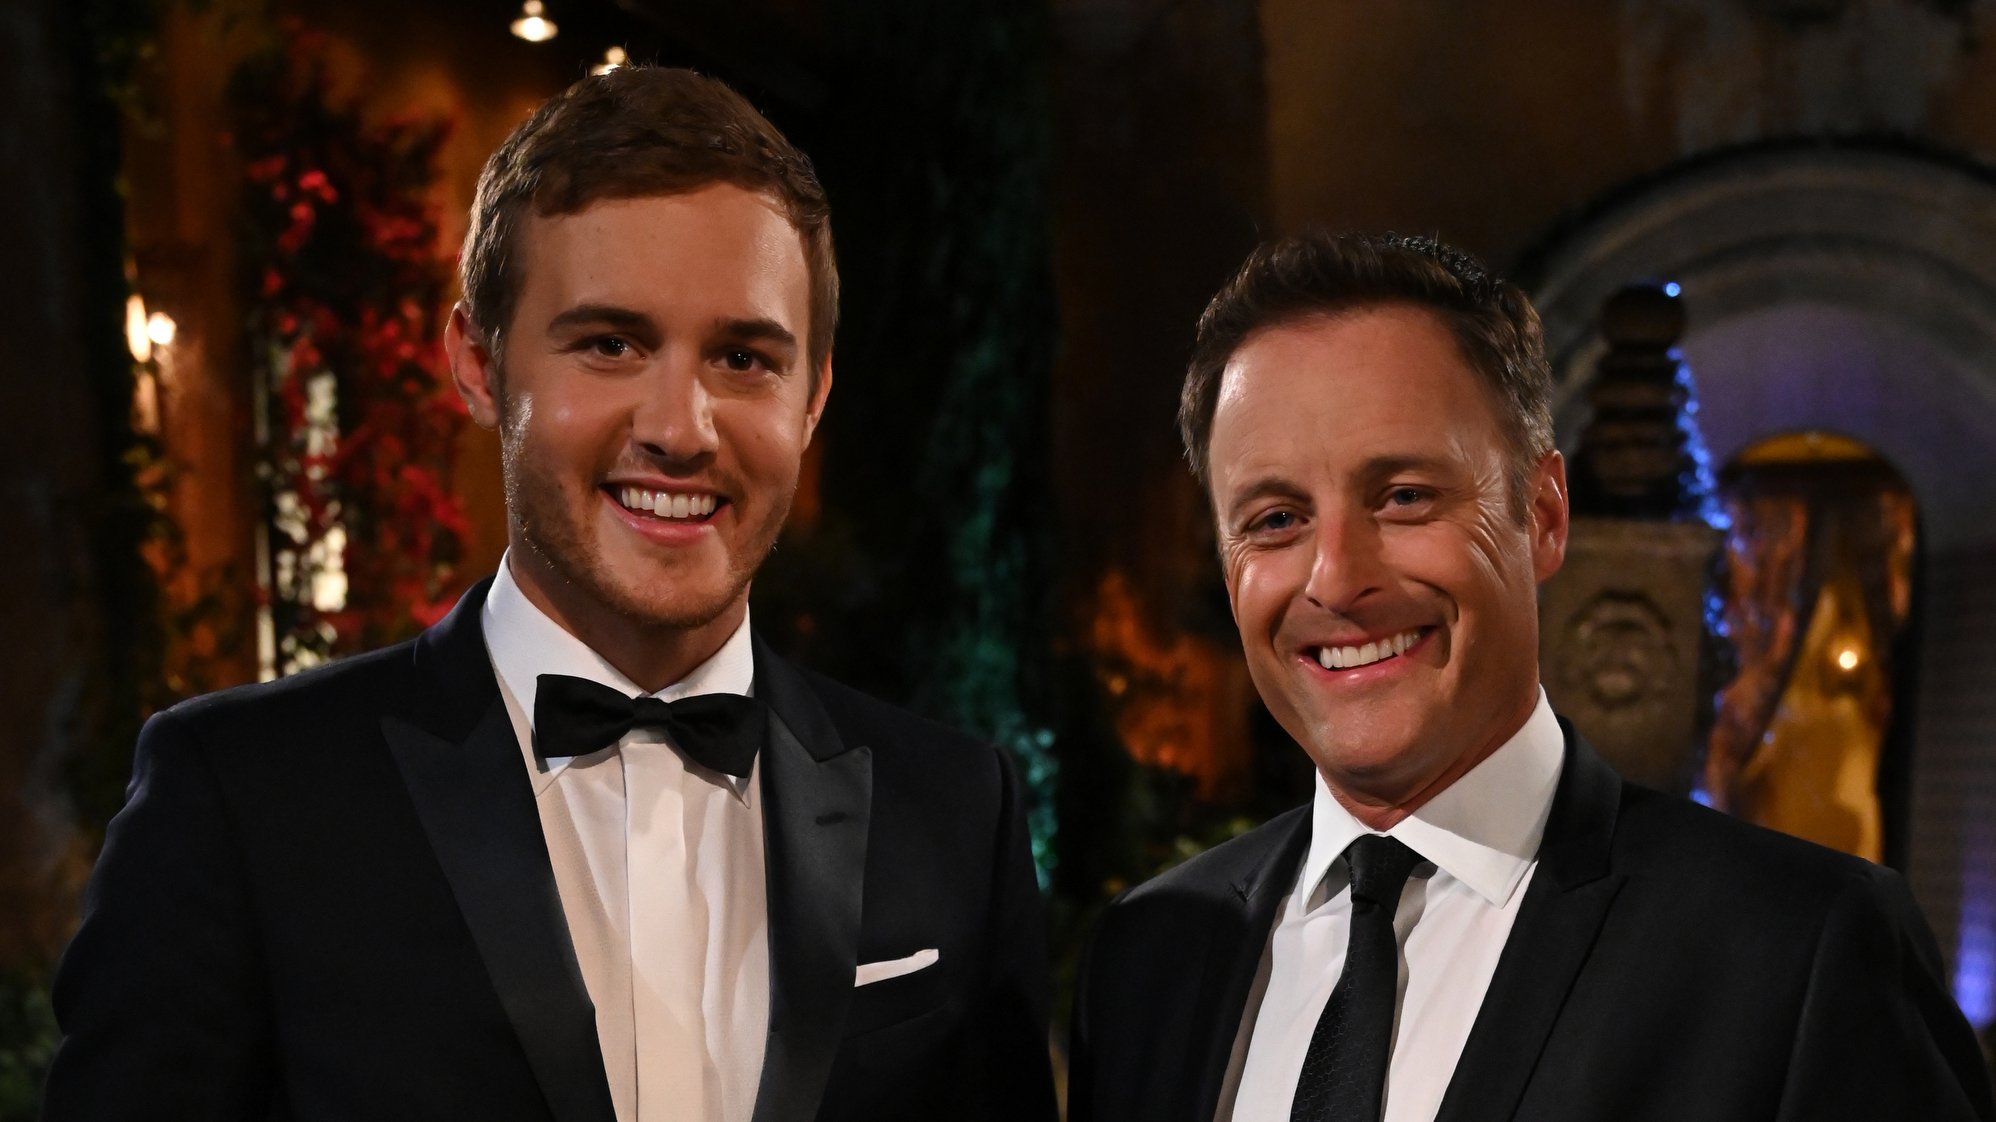 Chris Harrison On ‘Bachelor’ Peter Weber’s Emotional Reunion With Hannah Brown - variety.com